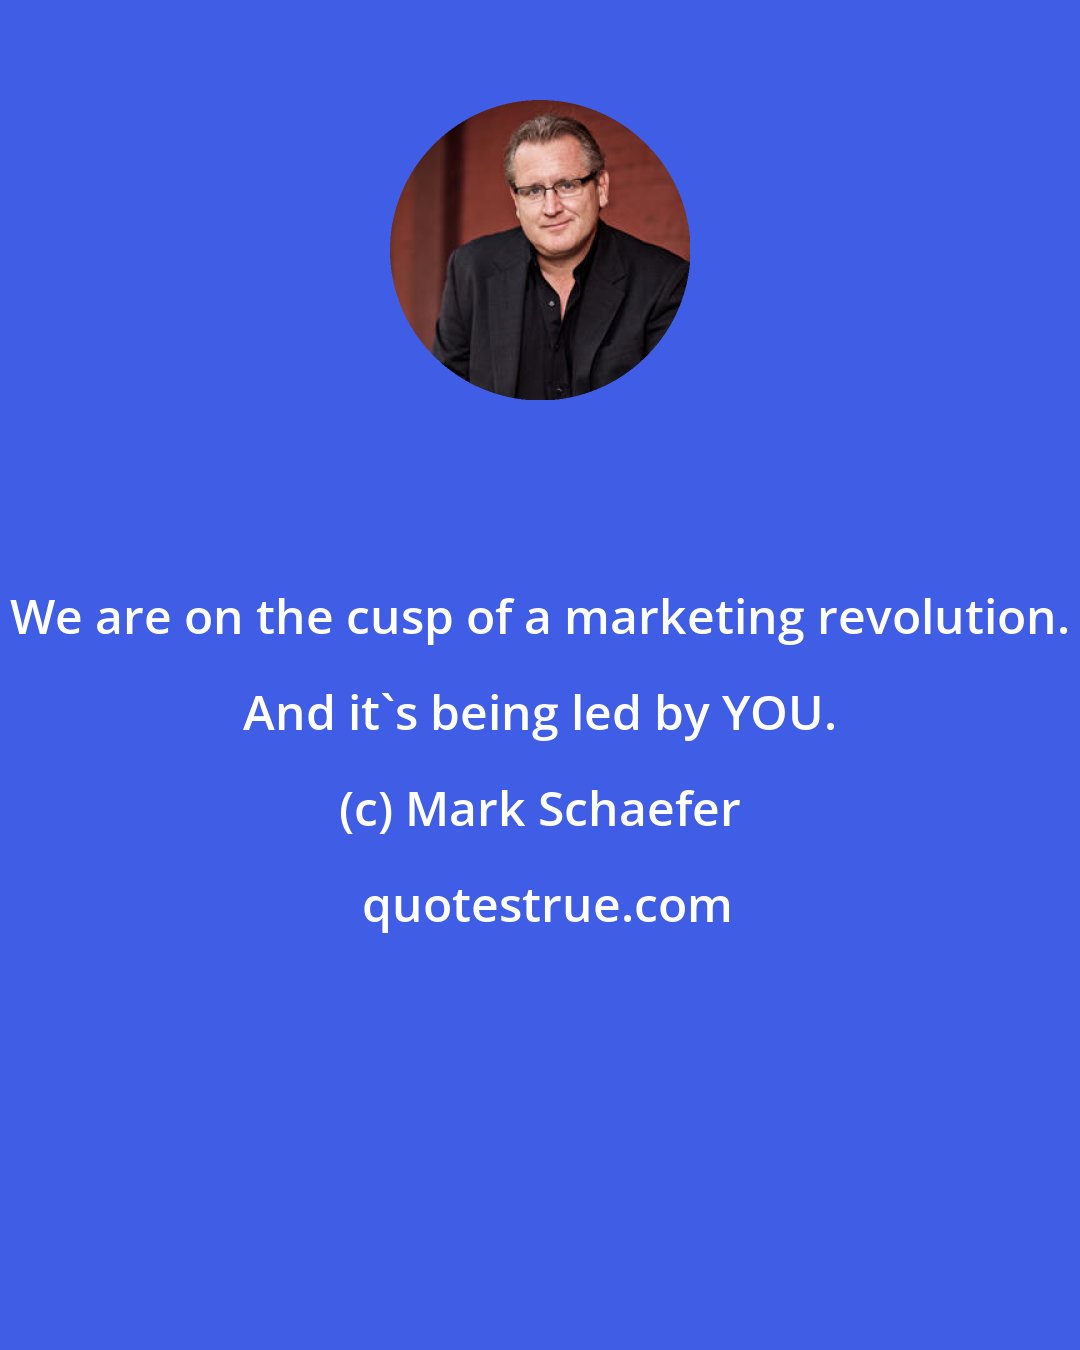 Mark Schaefer: We are on the cusp of a marketing revolution. And it's being led by YOU.